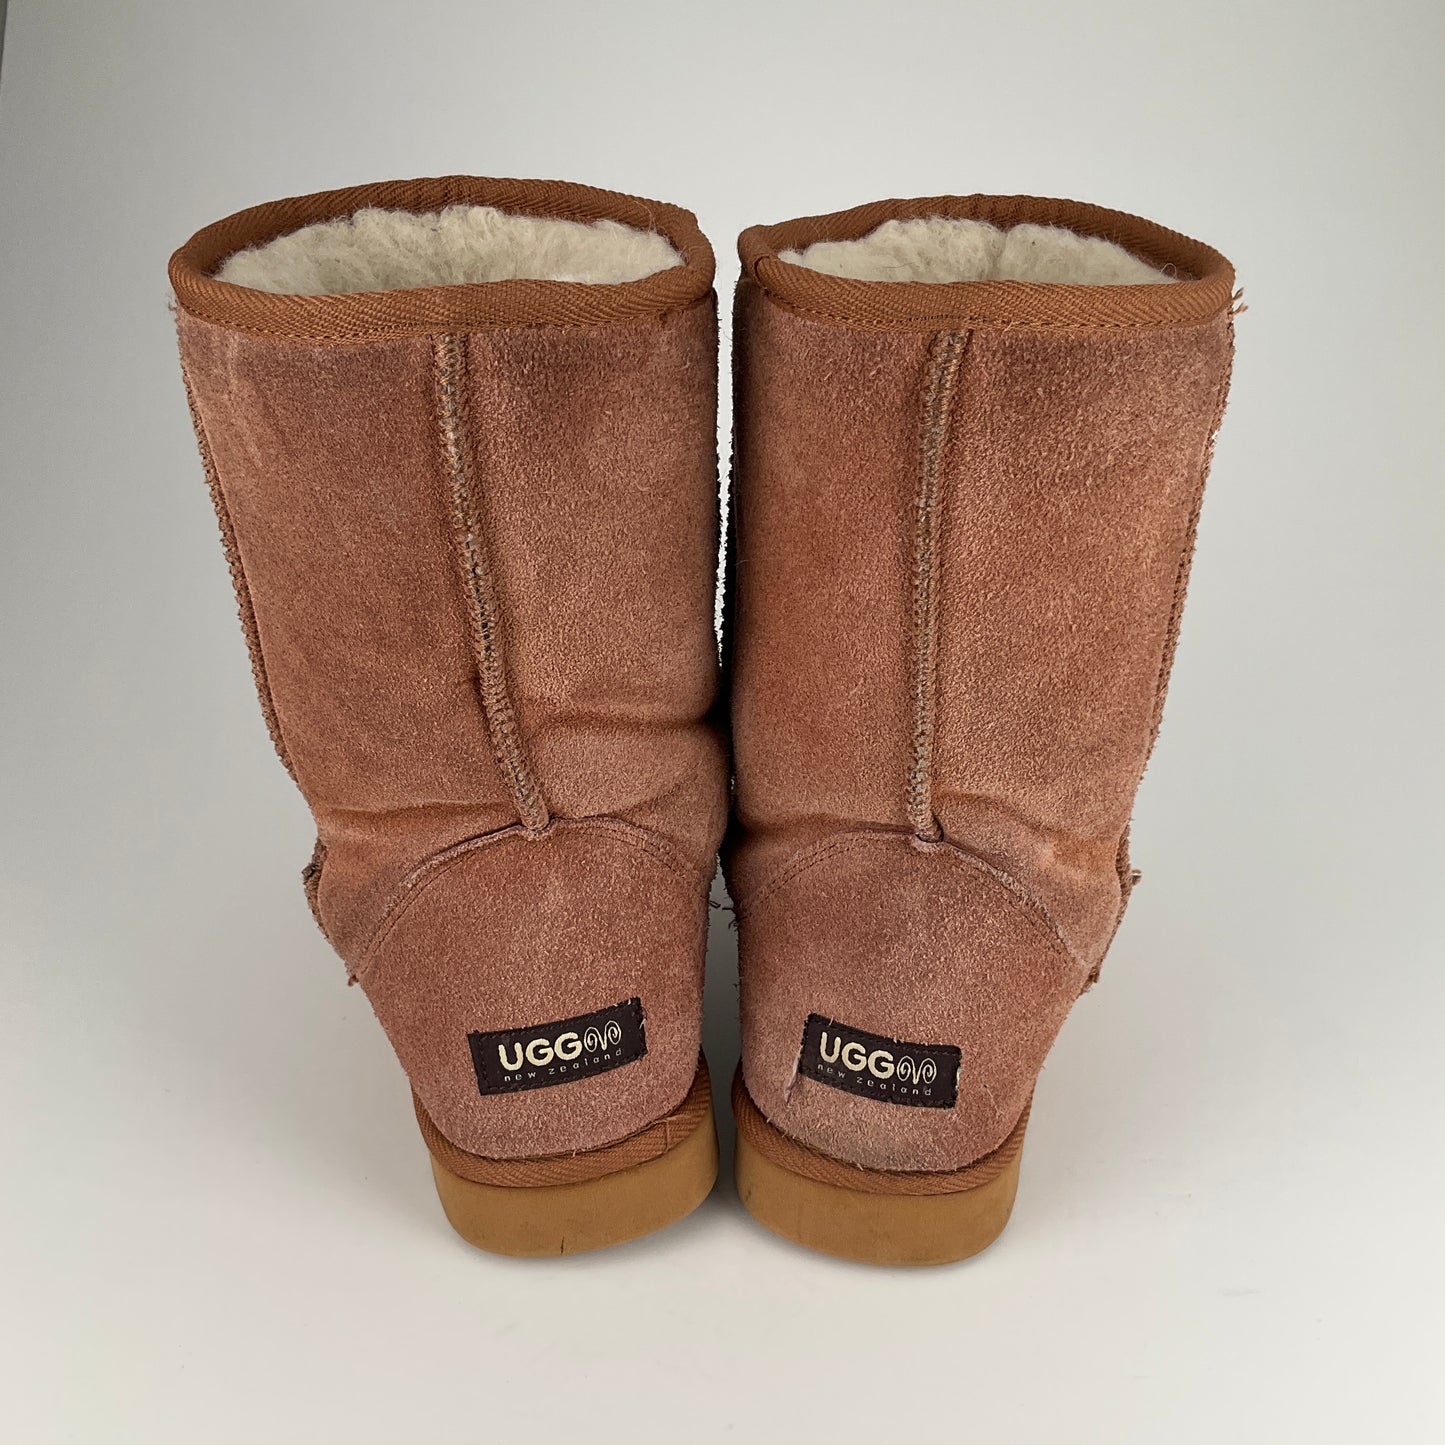 UGG - Boots - Size L9